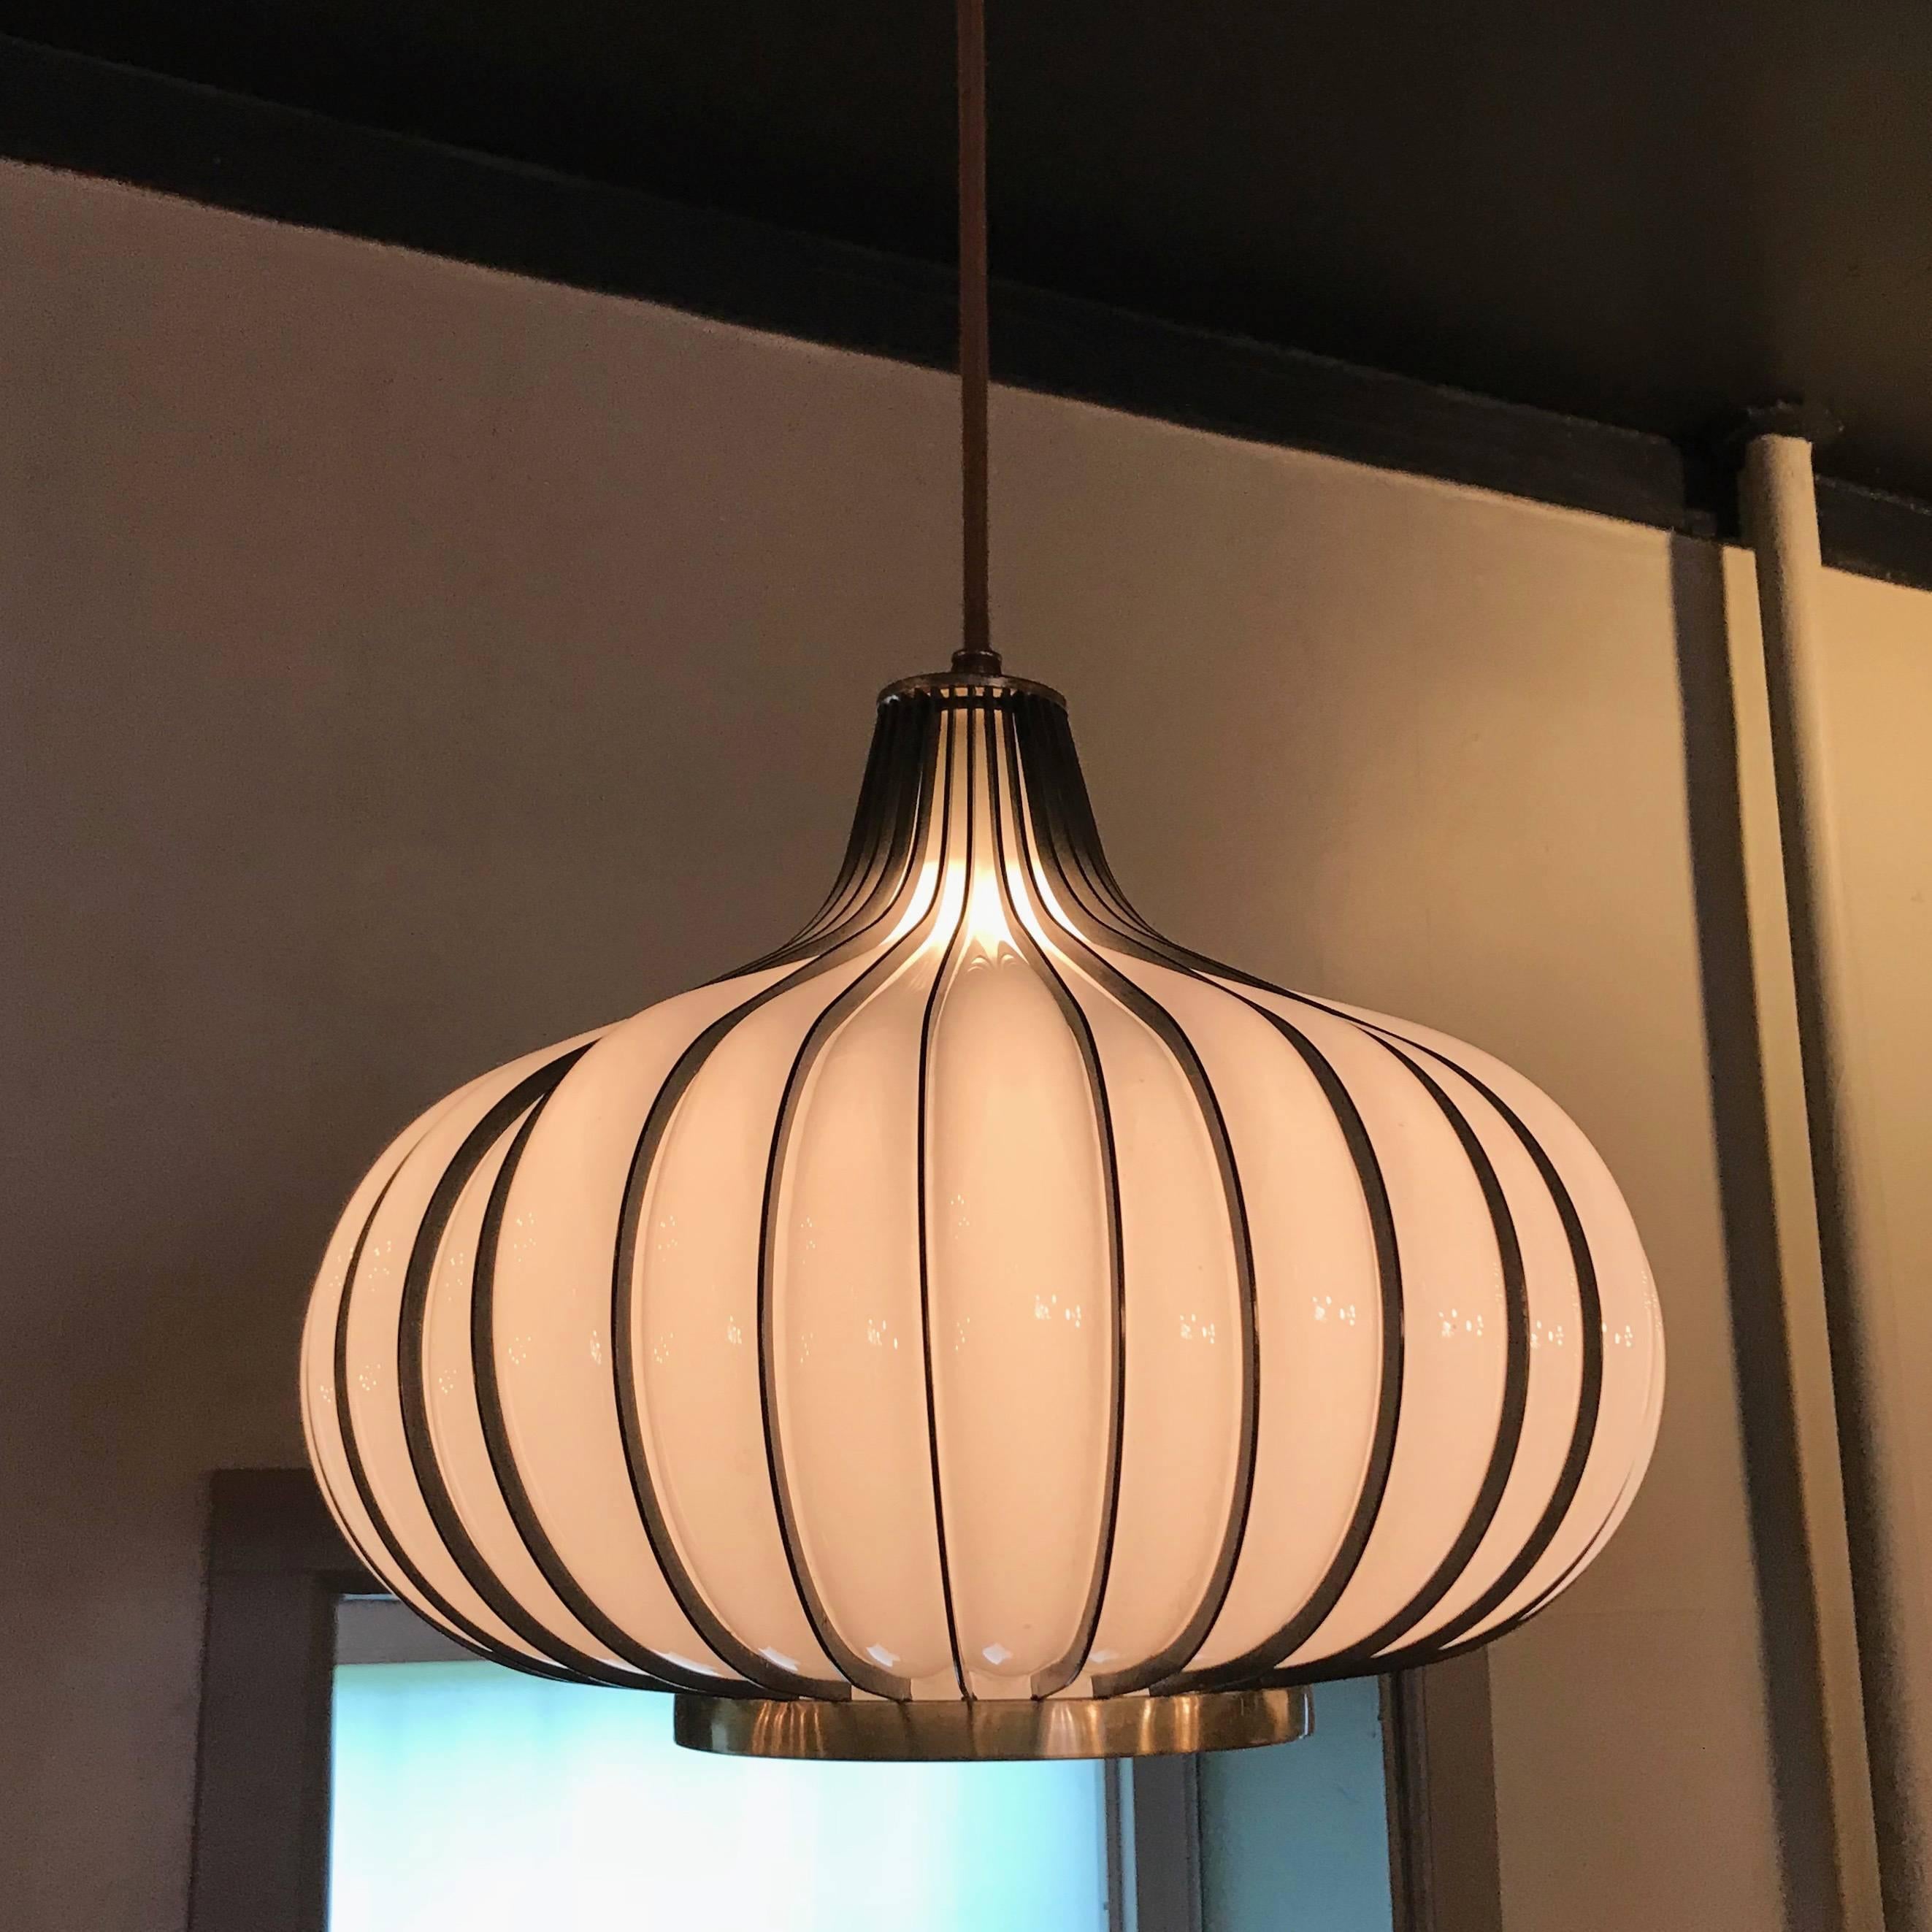 Midcentury, Hollywood Regency, garlic or onion shaped, swag, pendant light features blown milk glass shade encased in a brass-toned, steel frame. The pendant is newly wired with 6 feet of thick brown cloth cord.